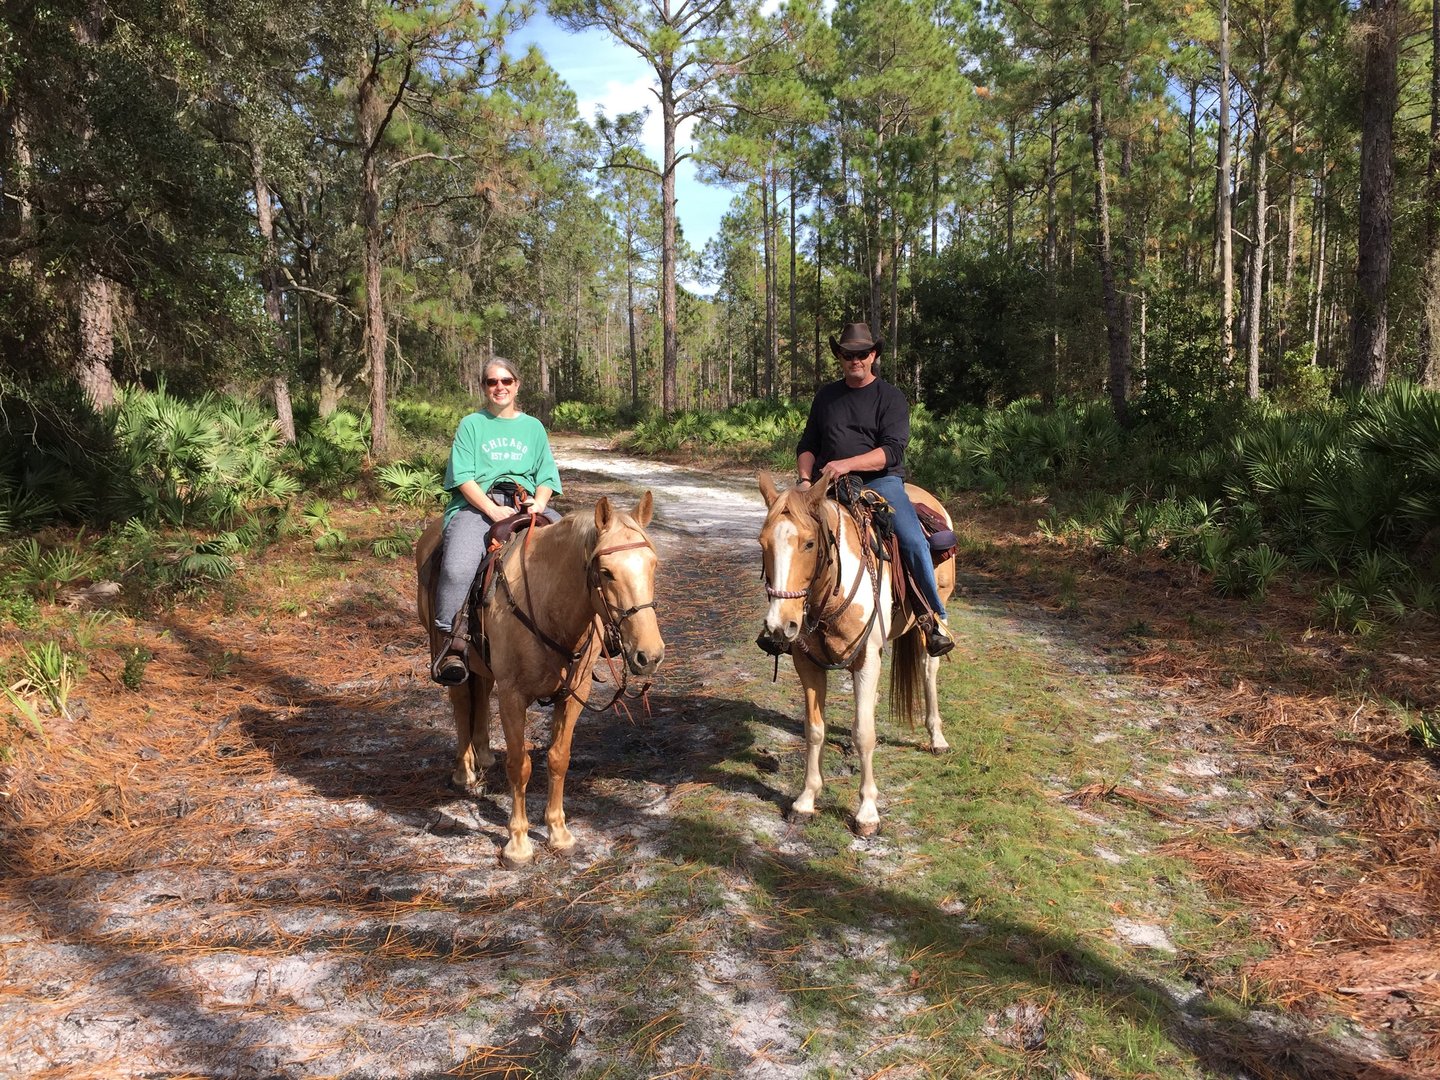 Two horseback riders on a wide park trail, the woman on the left and man on the right